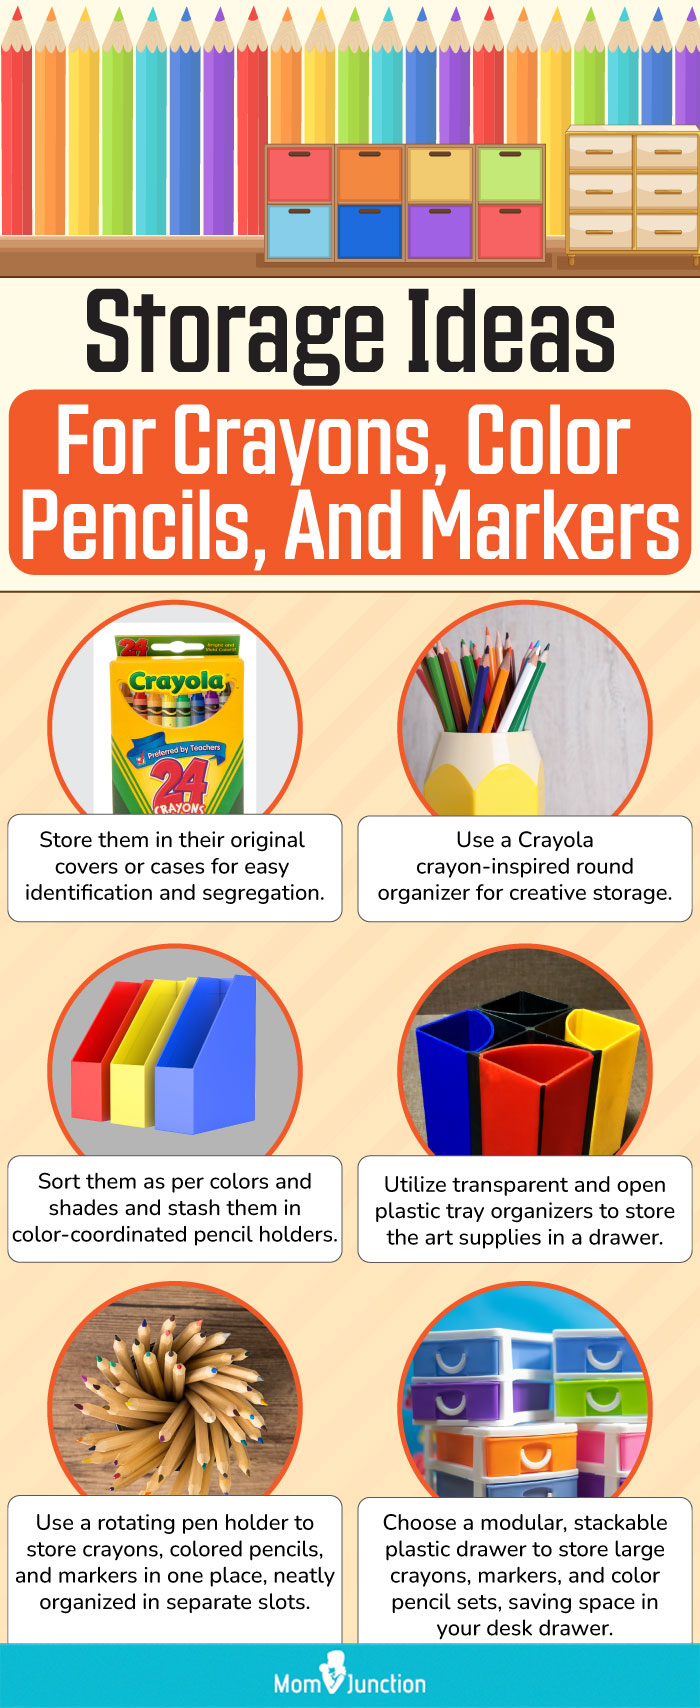 https://www.momjunction.com/wp-content/uploads/2023/09/Storage-Ideas-For-Crayons-Color-Pencils-And-Markers.jpg